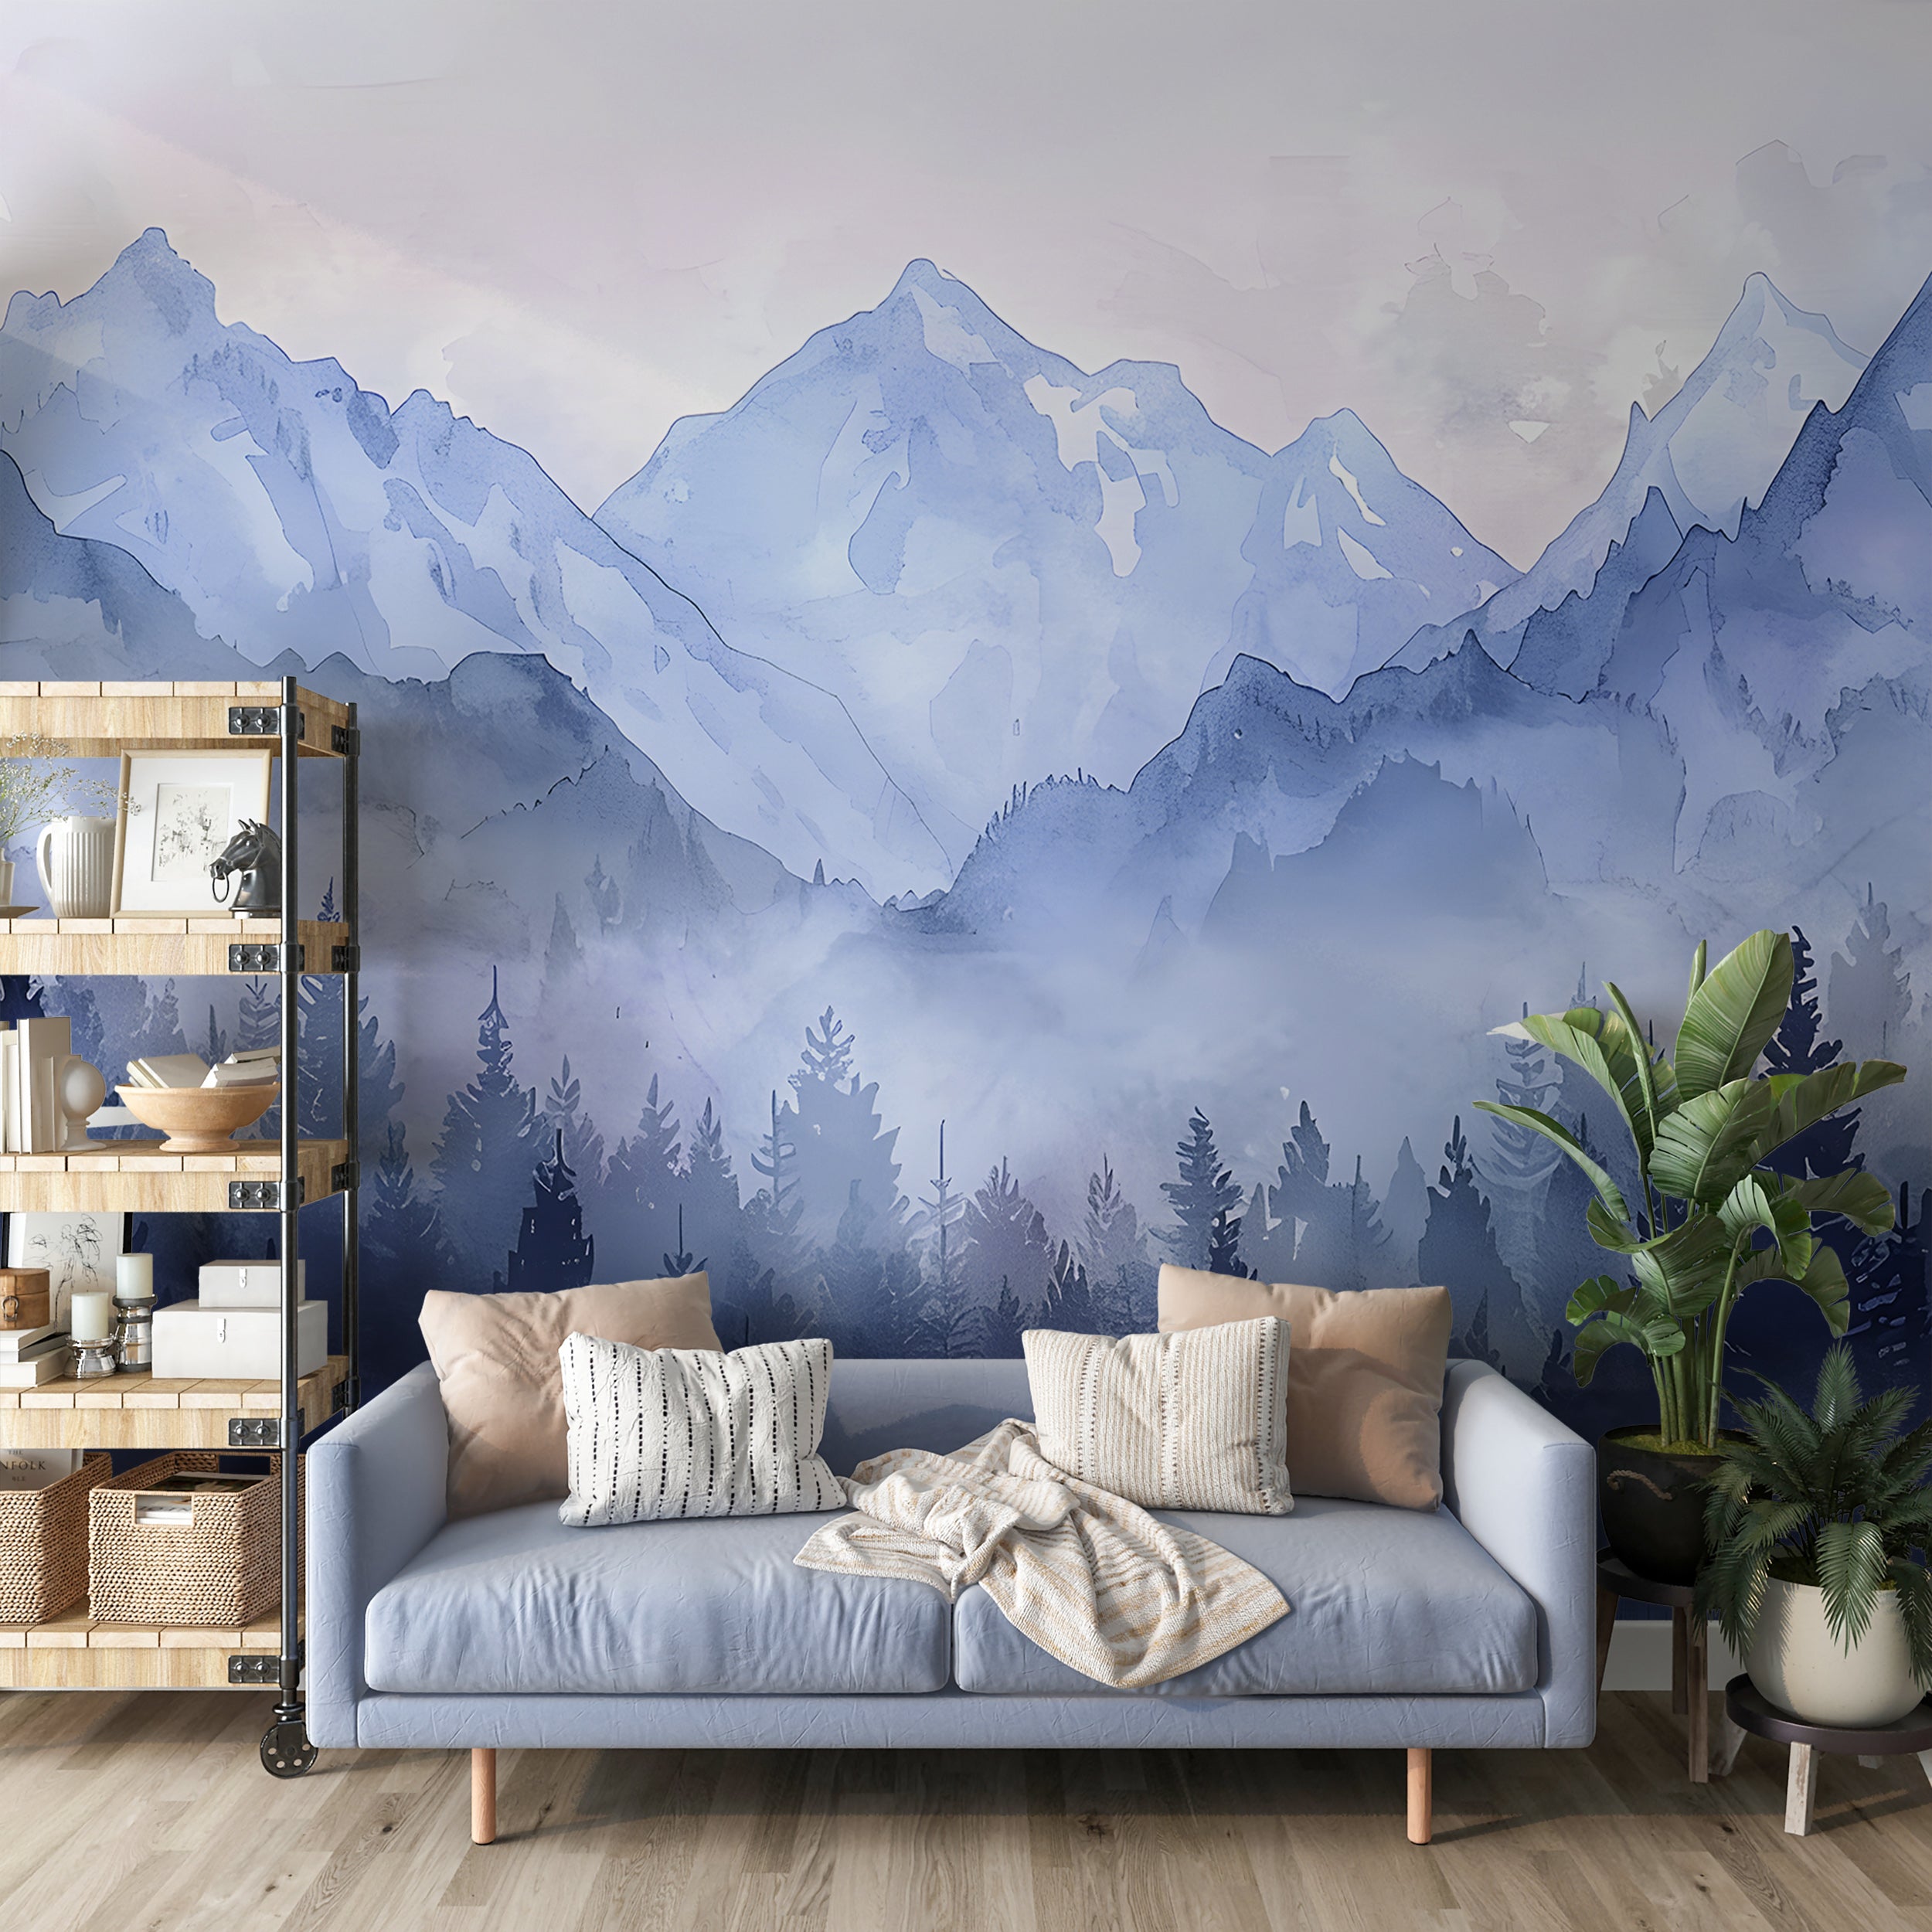 Watercolor Pastel Blue Mountains Mural, Forest and Mountain Landscape Wallpaper, Self-adhesive Removable Blue Nature Nursery Decal